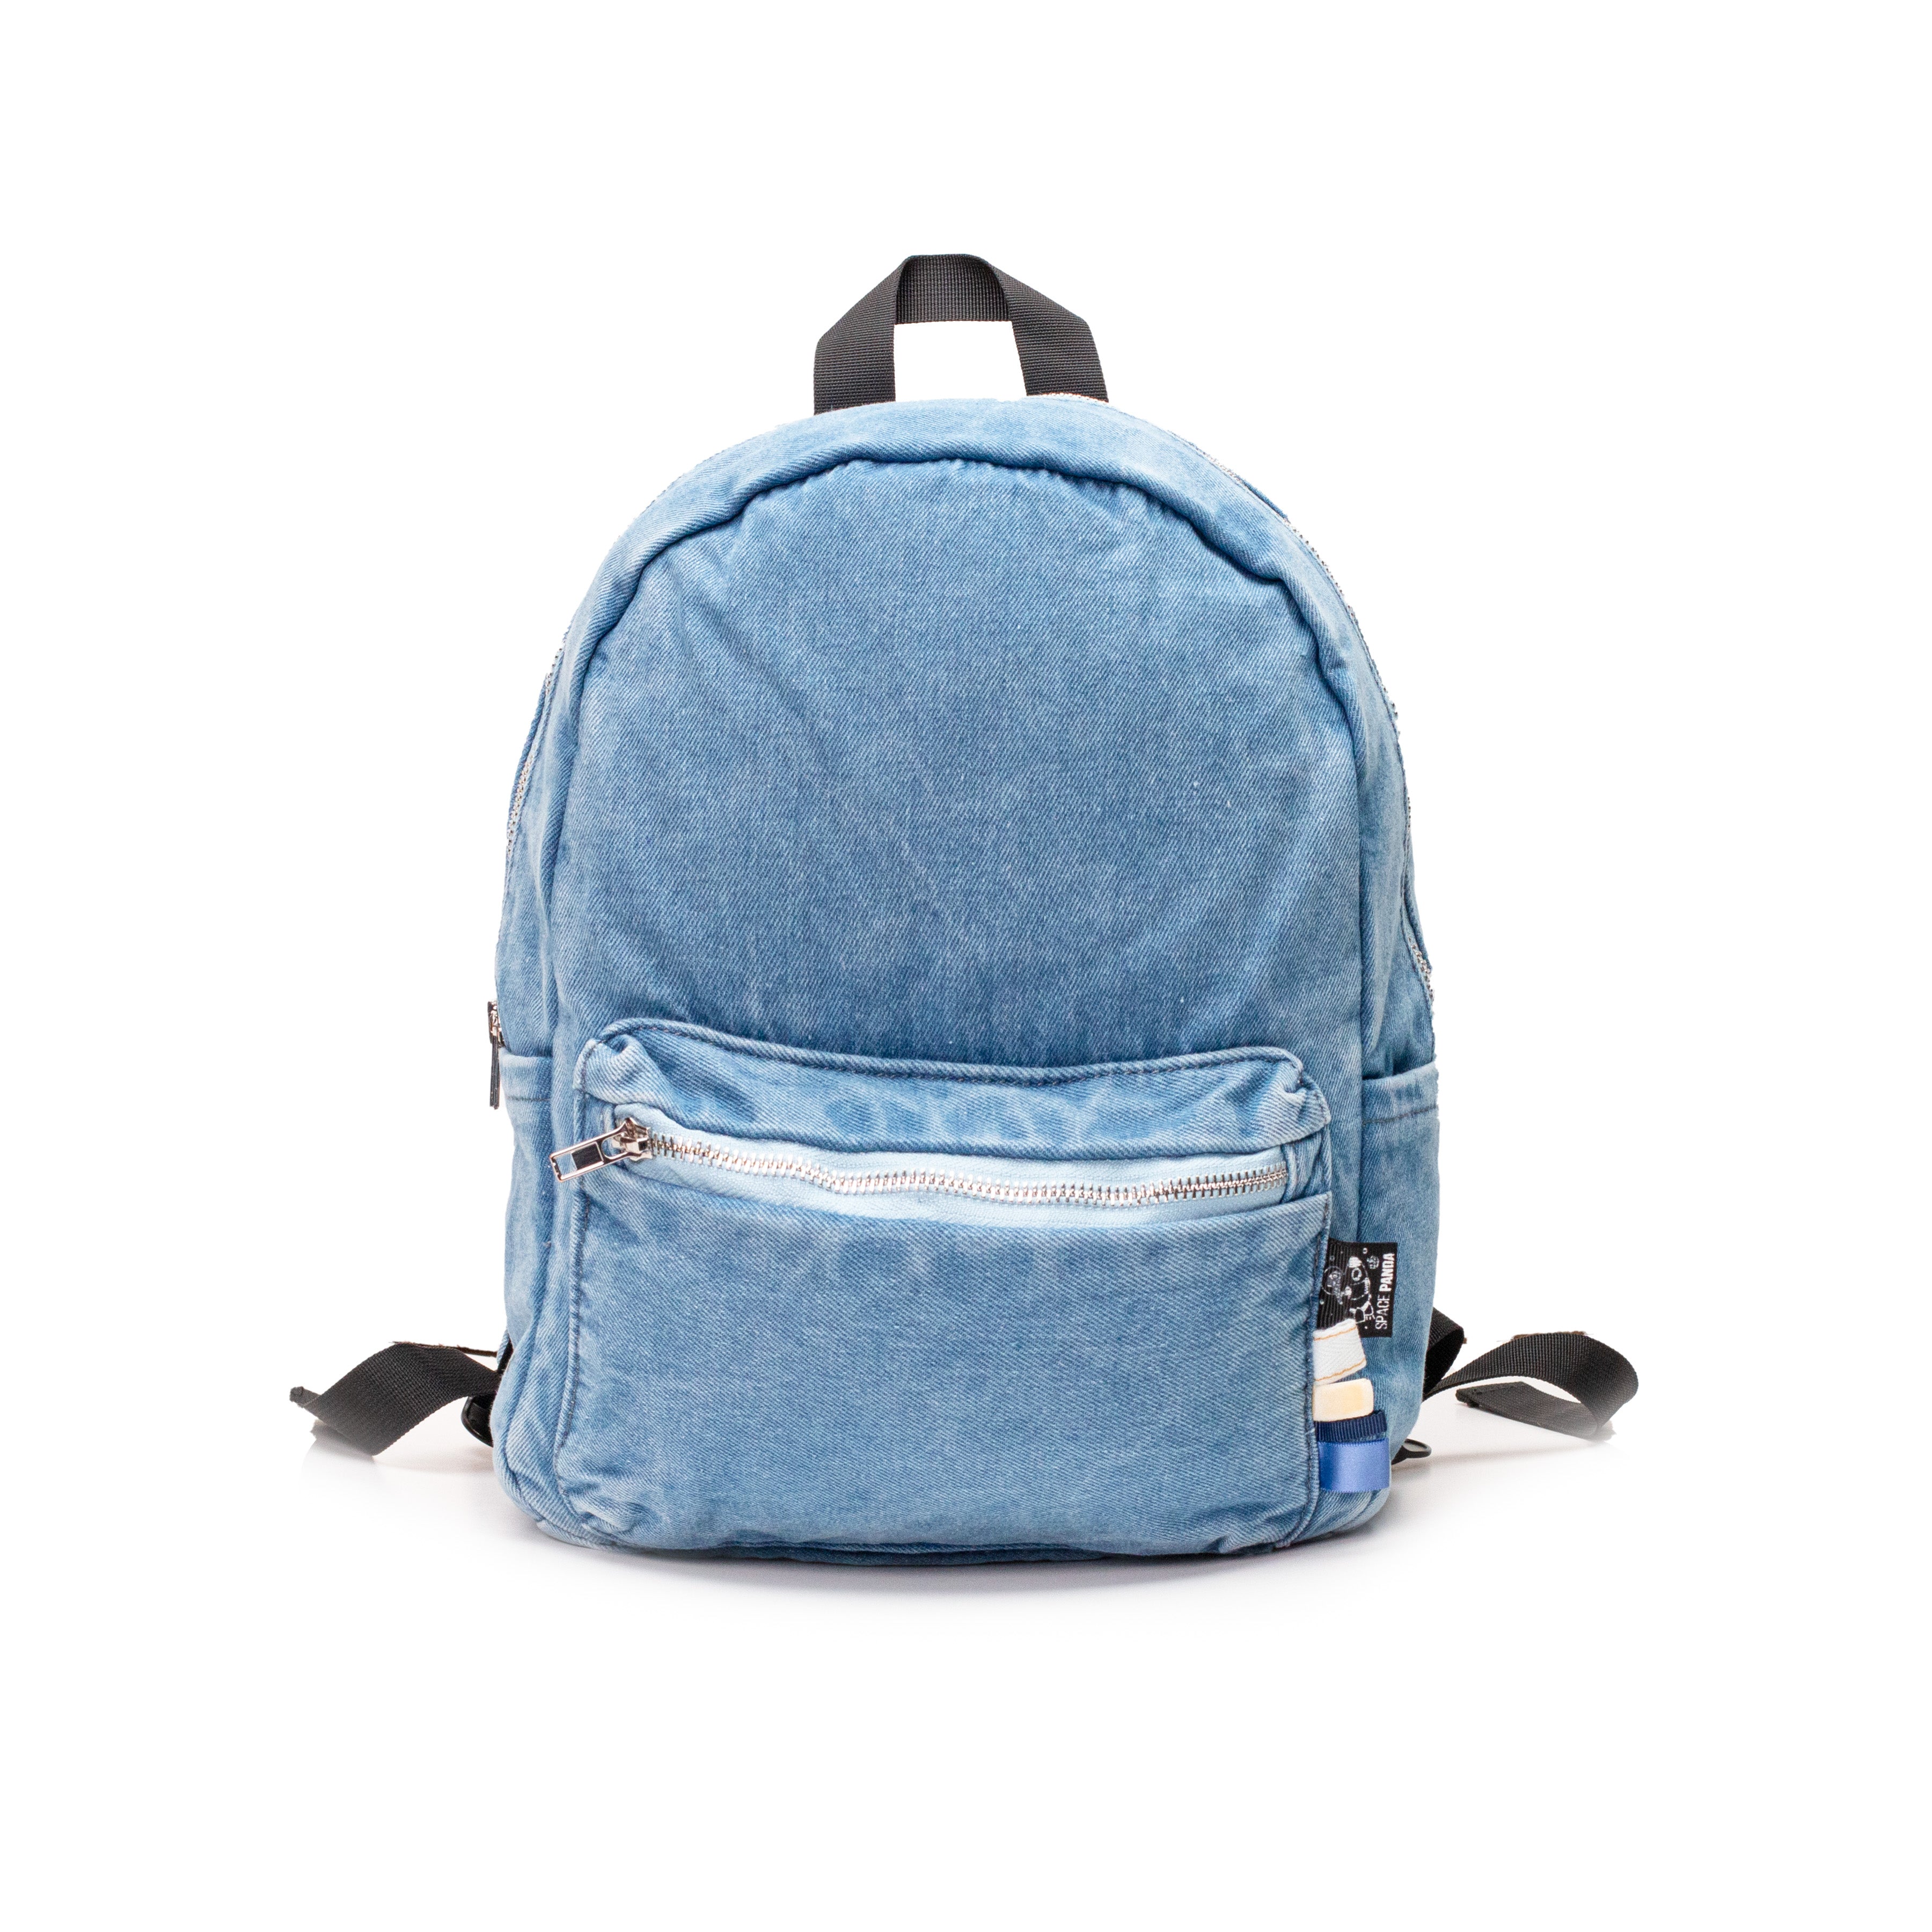 Vintage Denim Backpack for Women Jeans Travel Bag Lightweight Casual  Rucksack (636 Light) : Amazon.ca: Clothing, Shoes & Accessories